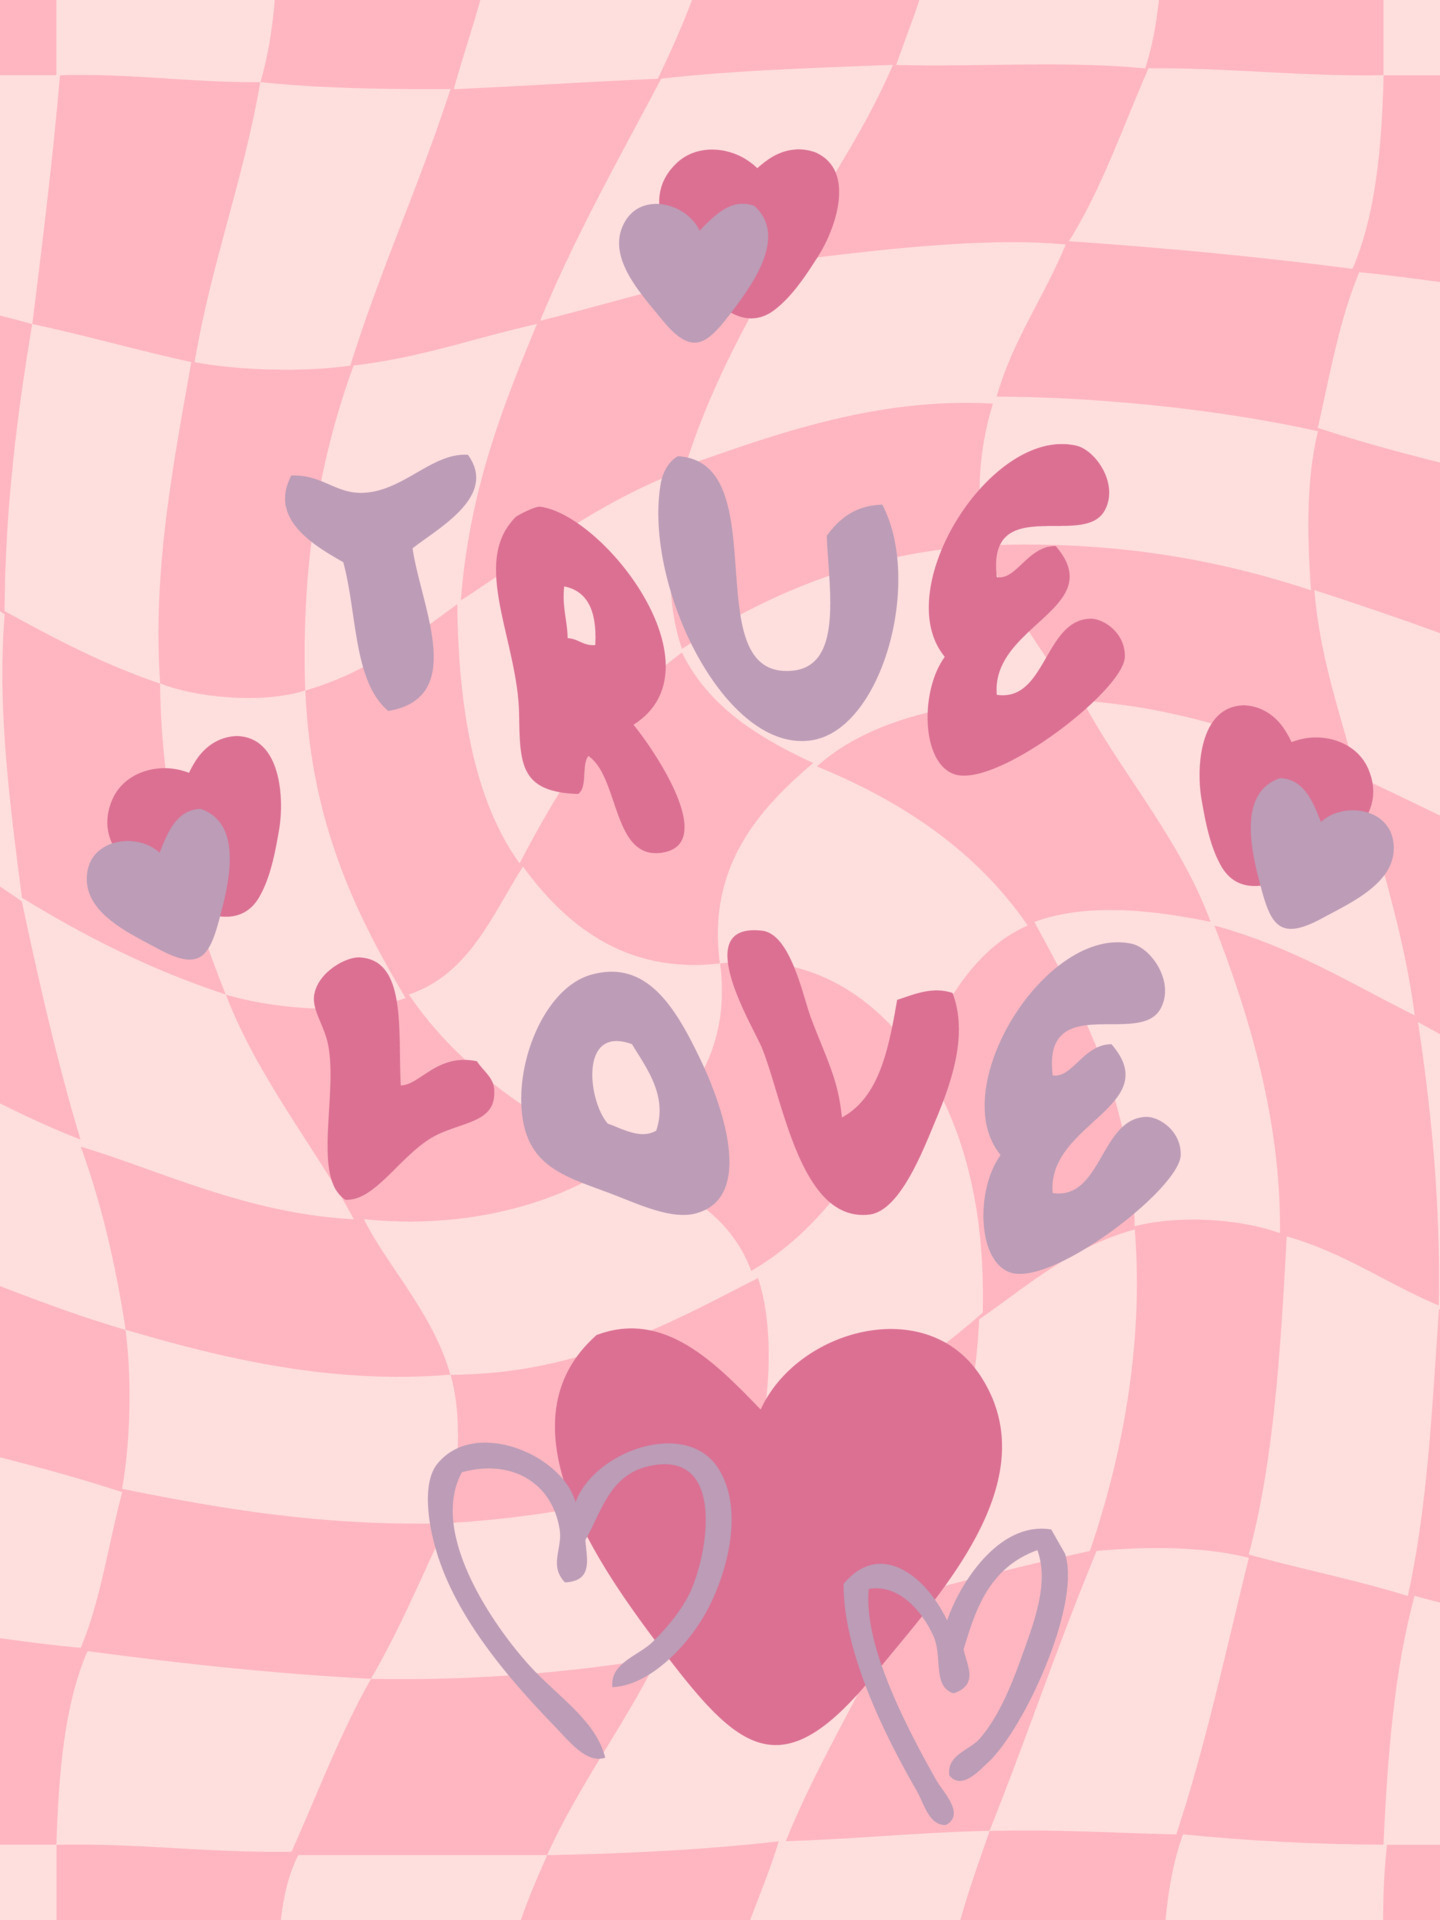 1440x1920 TRUE LOVE slogan print with groovy hearts on trippy grid background. 8054673 Vector Art